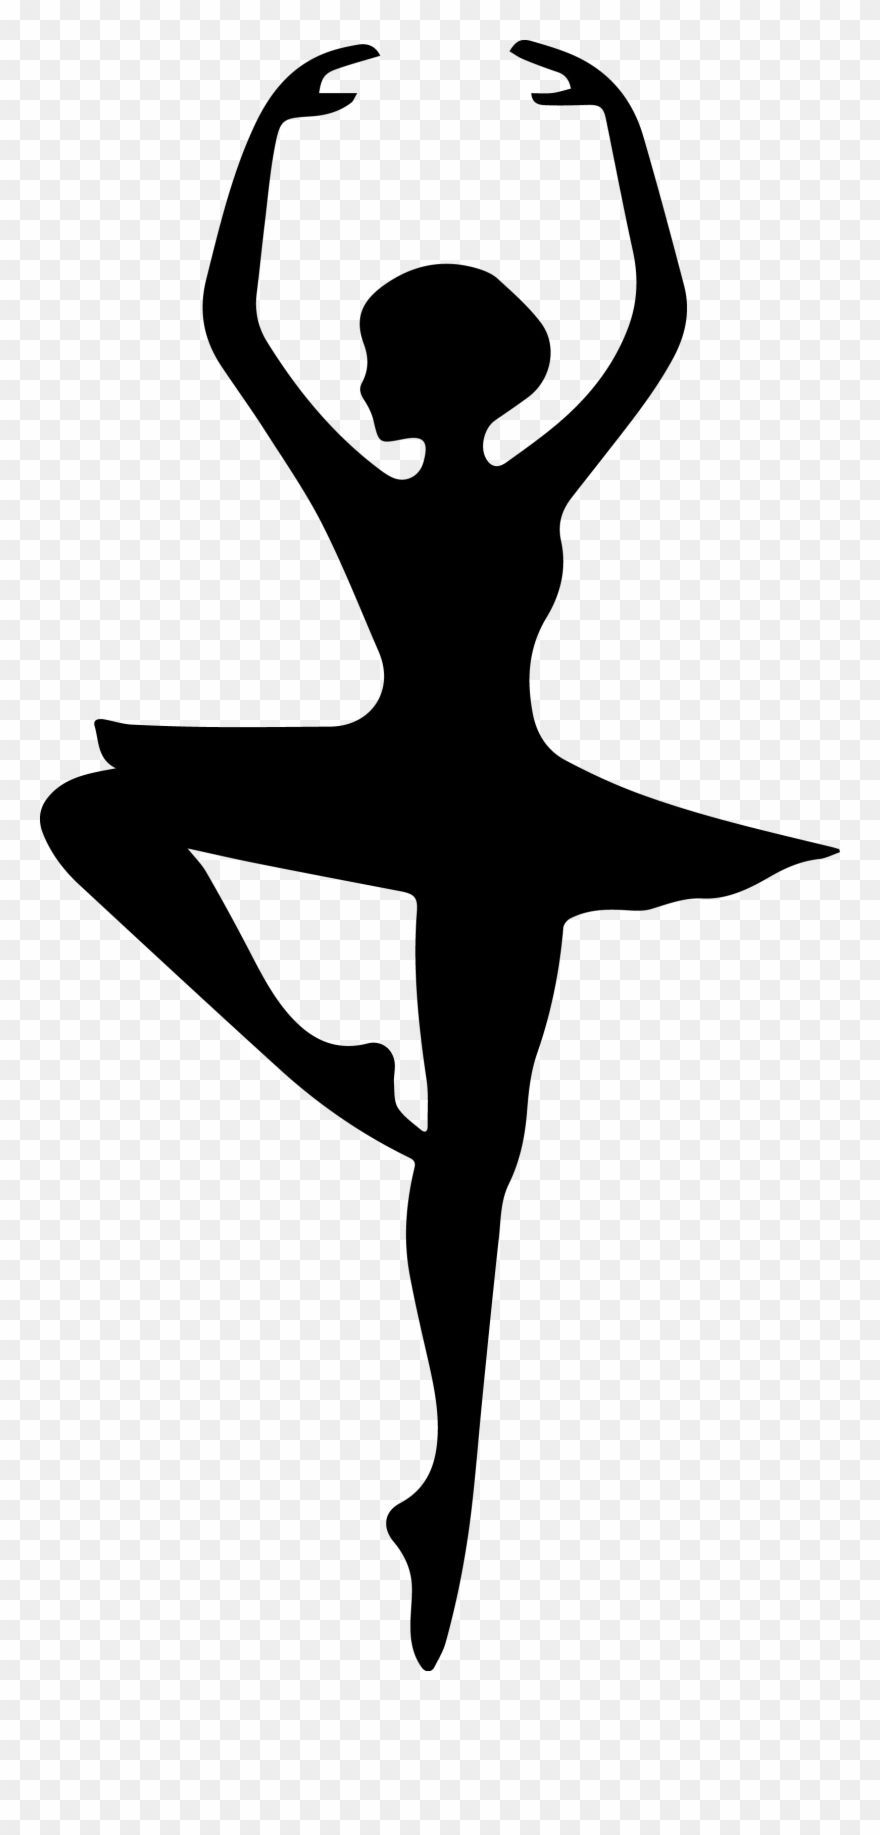 Ballerina clipart black and white clipart images gallery for